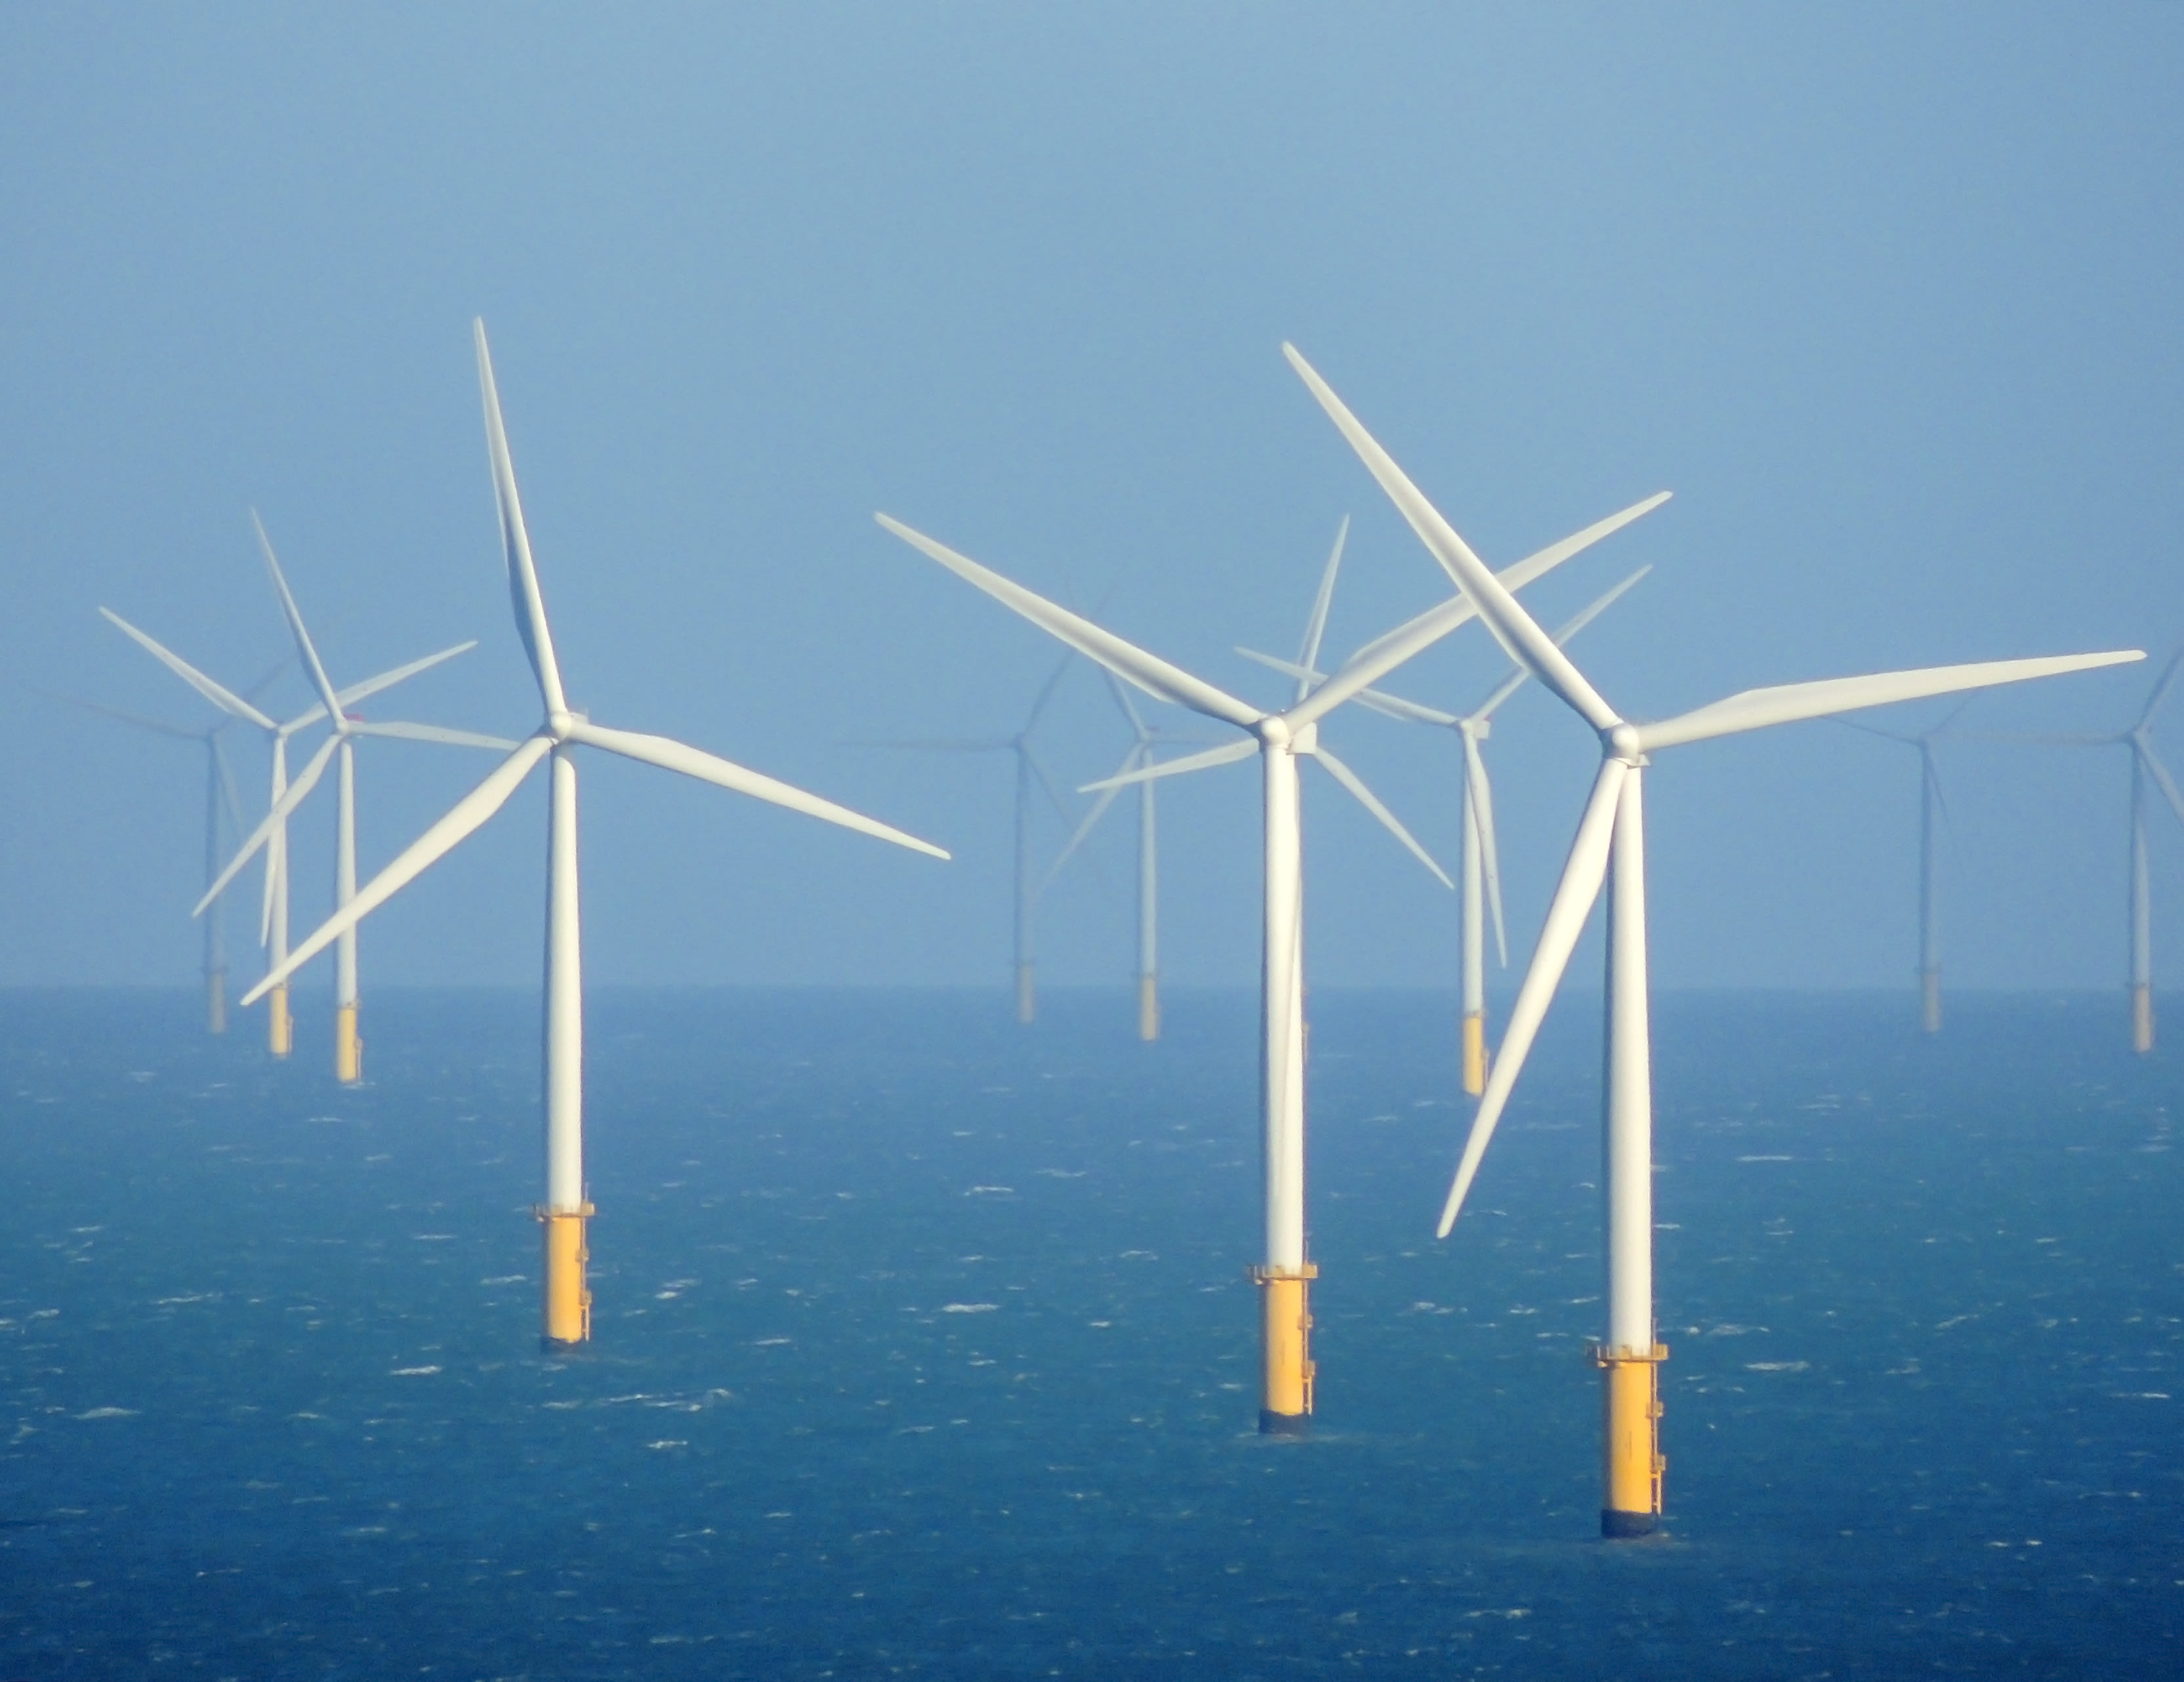 UK PM Boris Johnson says offshore wind will power every home in the country by 2030